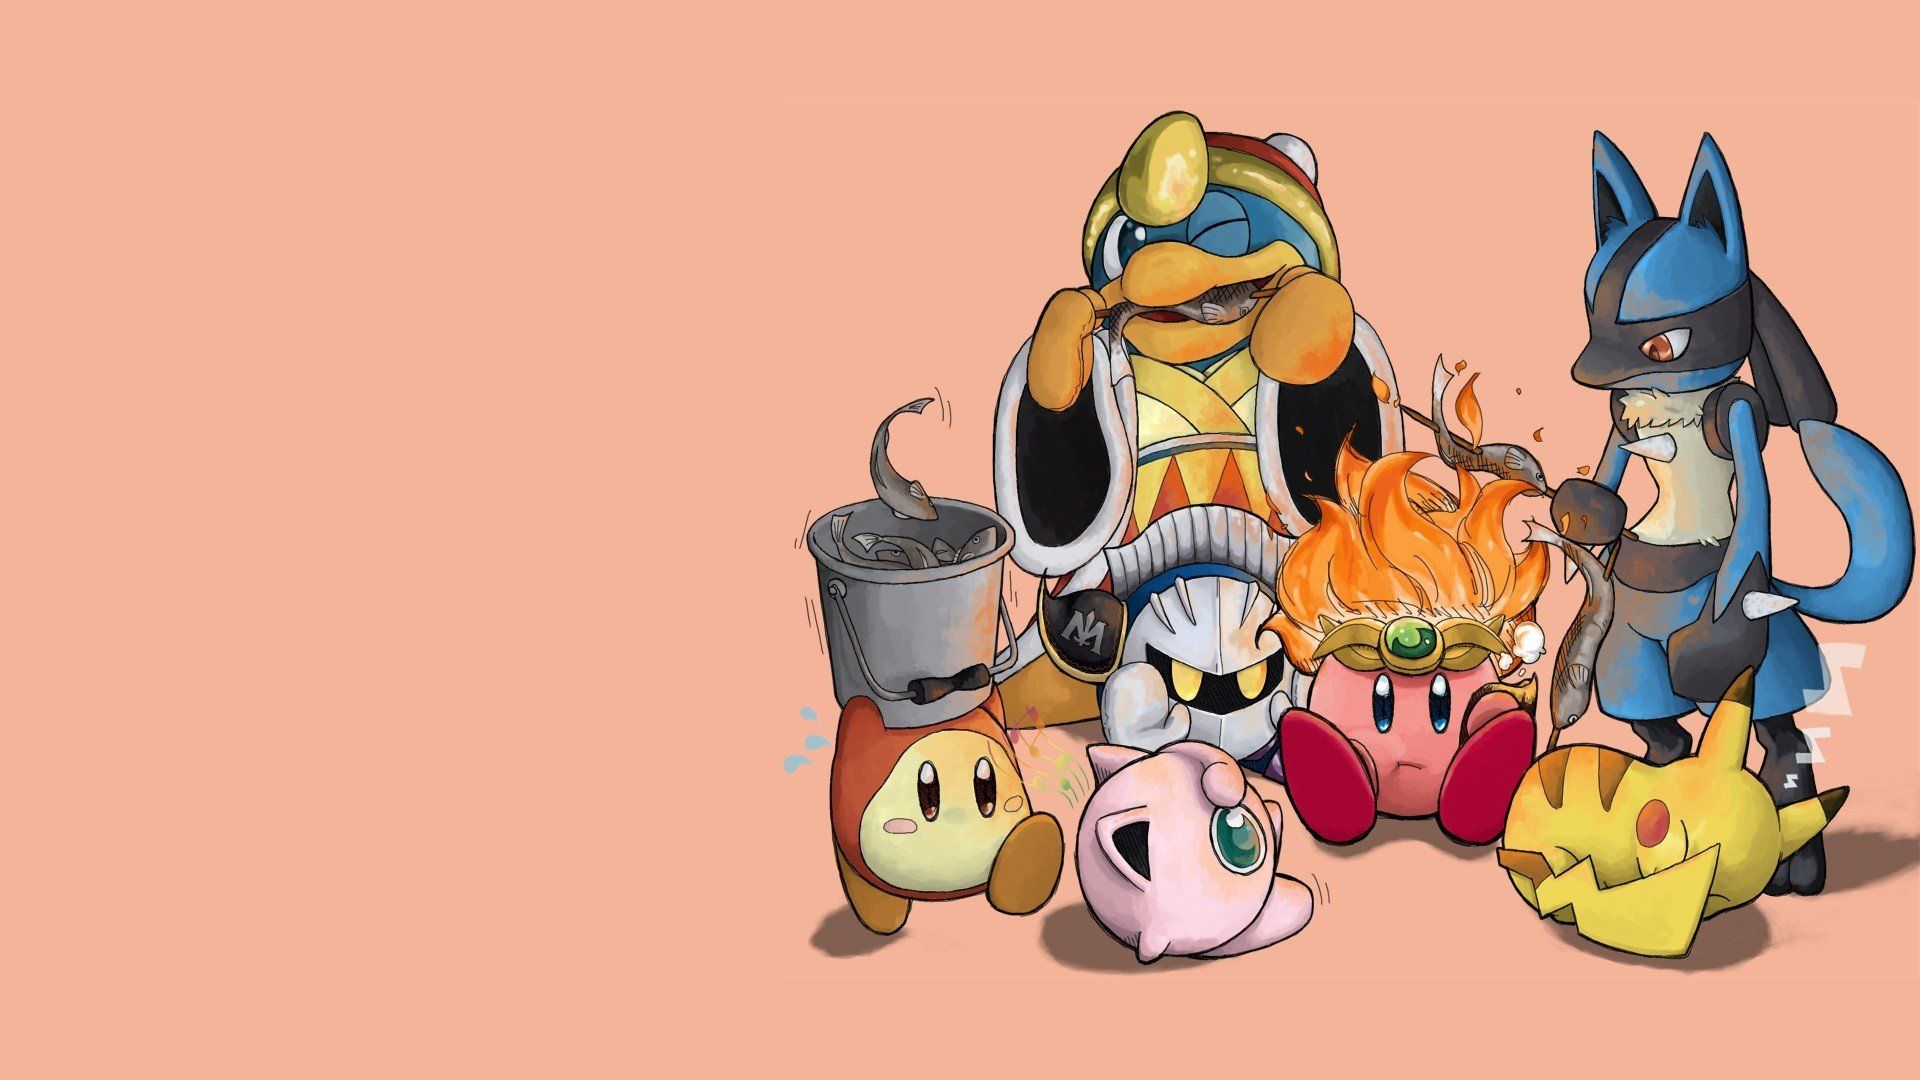 Kirby Pokemon video games Pikachu King Dedede camping simple background Lucario Jigglypuff Metaknight Super Smash Brothers Waddle Dee wallpaperx1080